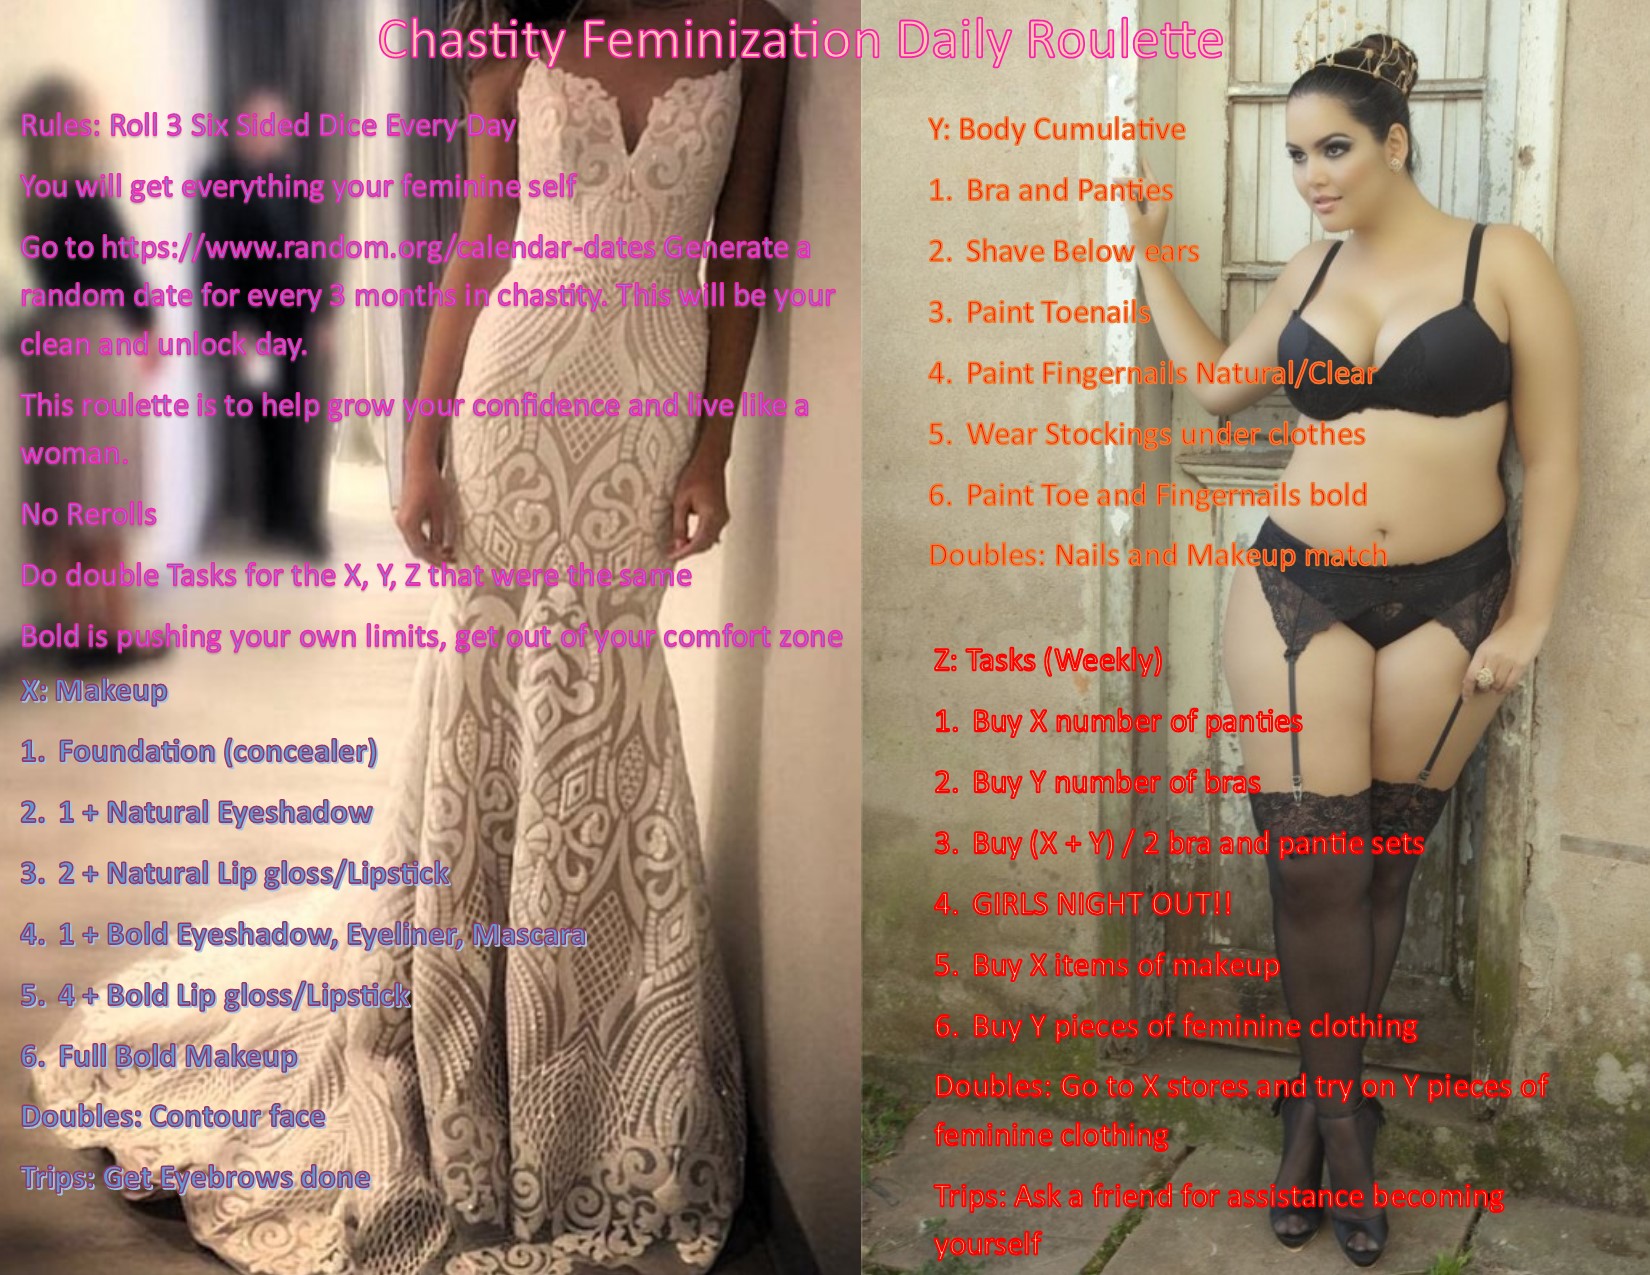 Chastity Feminization Daily Roulette. 